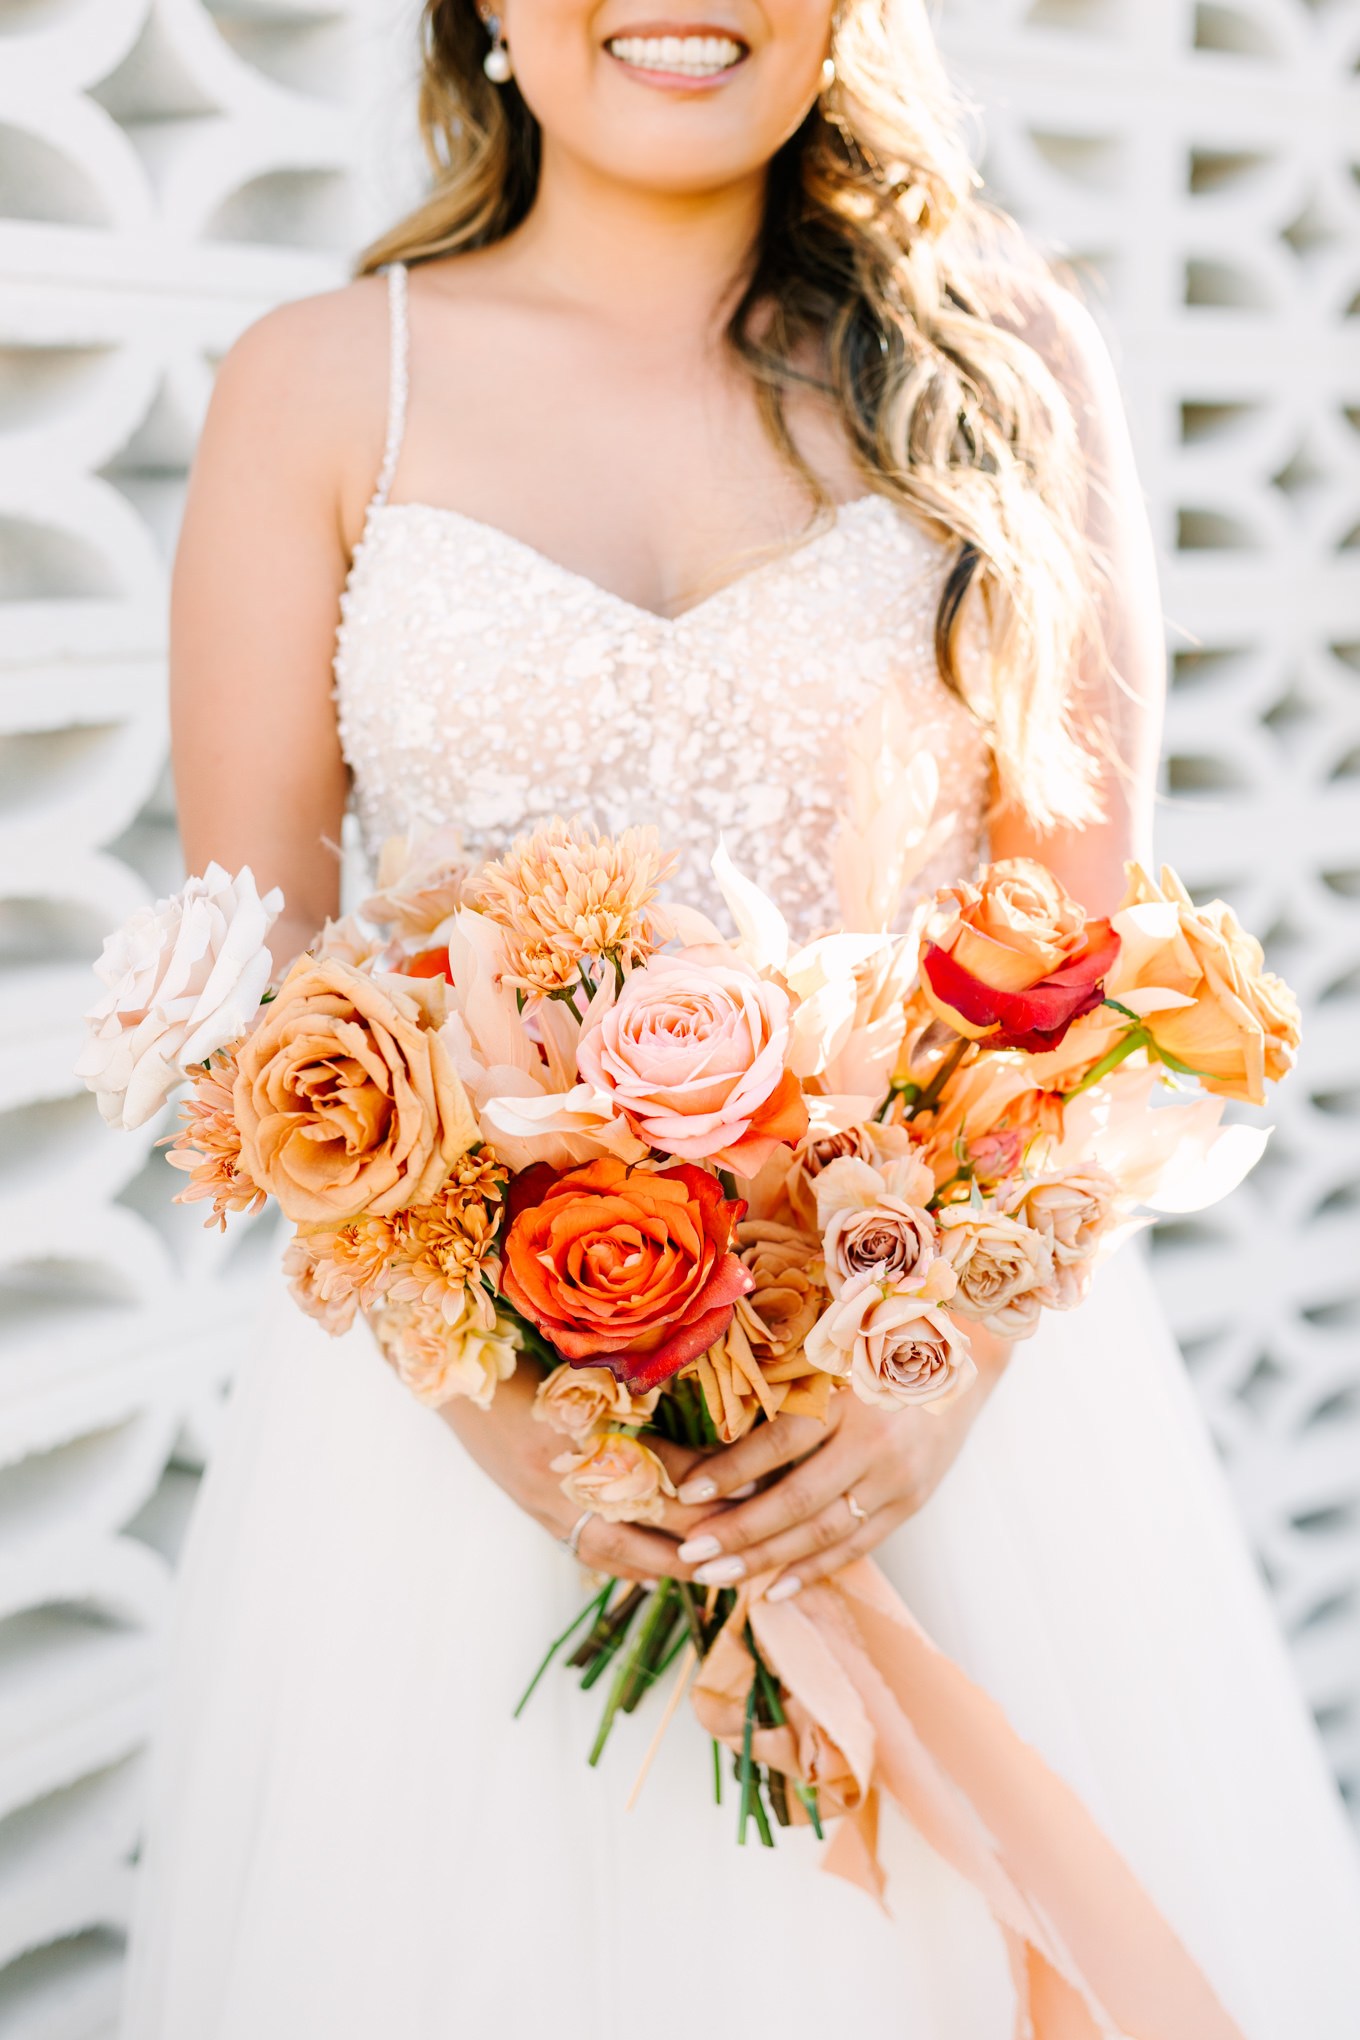 Orange, peach and yellow bridal bouquet | Pink and orange Lautner Compound wedding | Colorful Palm Springs wedding photography | #palmspringsphotographer #palmspringswedding #lautnercompound #southerncaliforniawedding  Source: Mary Costa Photography | Los Angeles